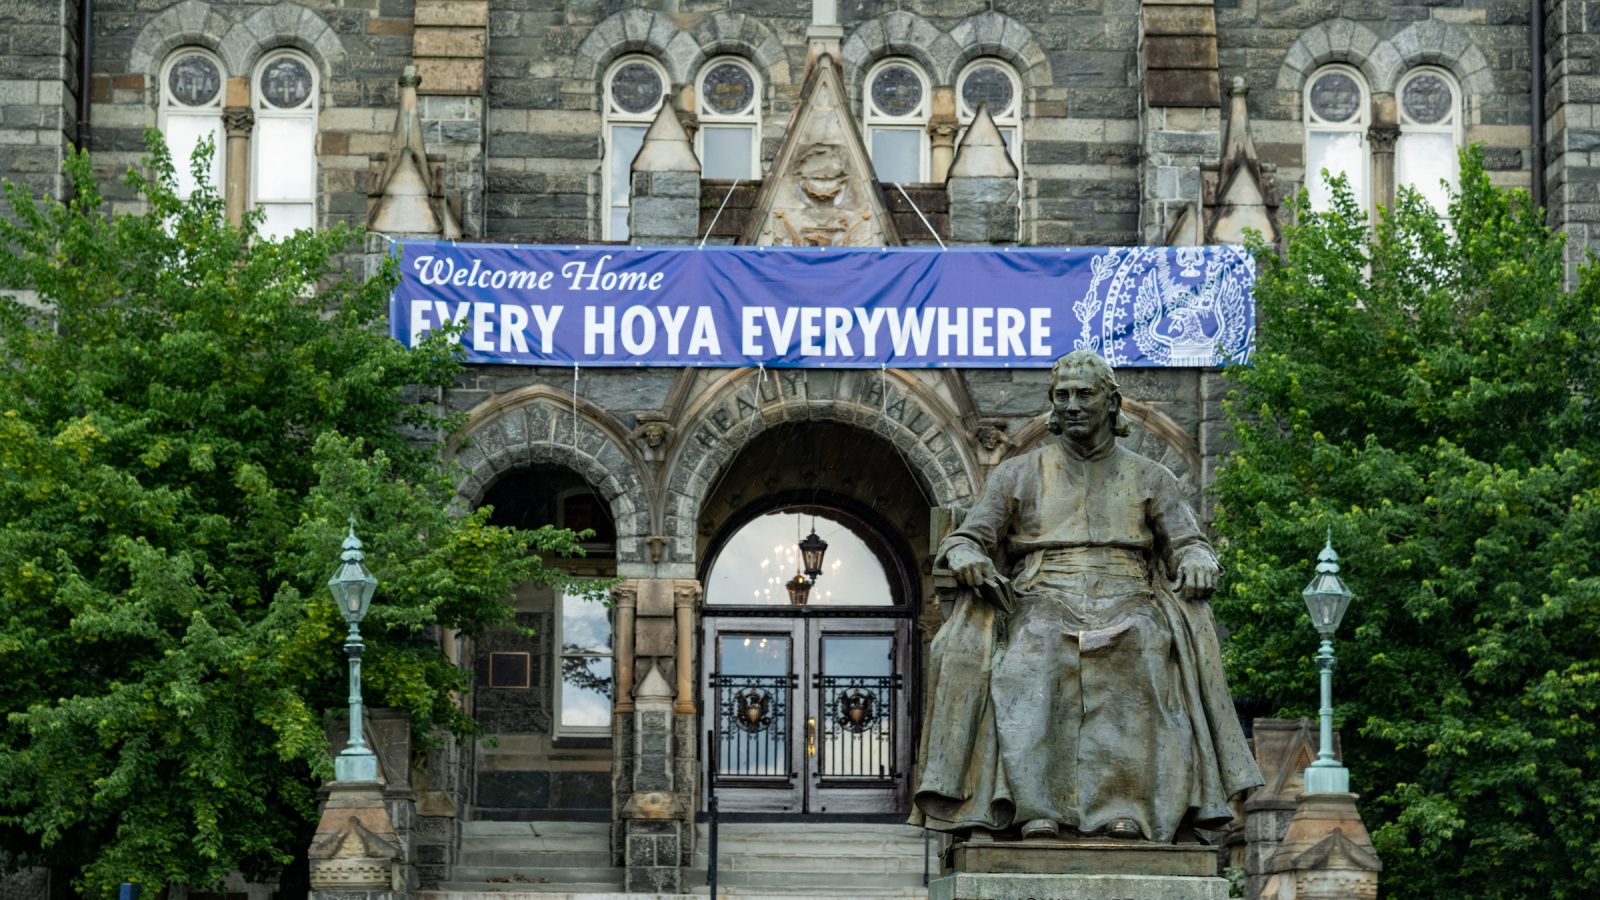 John Carroll statue in front of Healy Hall with the sign &quot;Welcome Home Every Hoya Everywhere&quot;